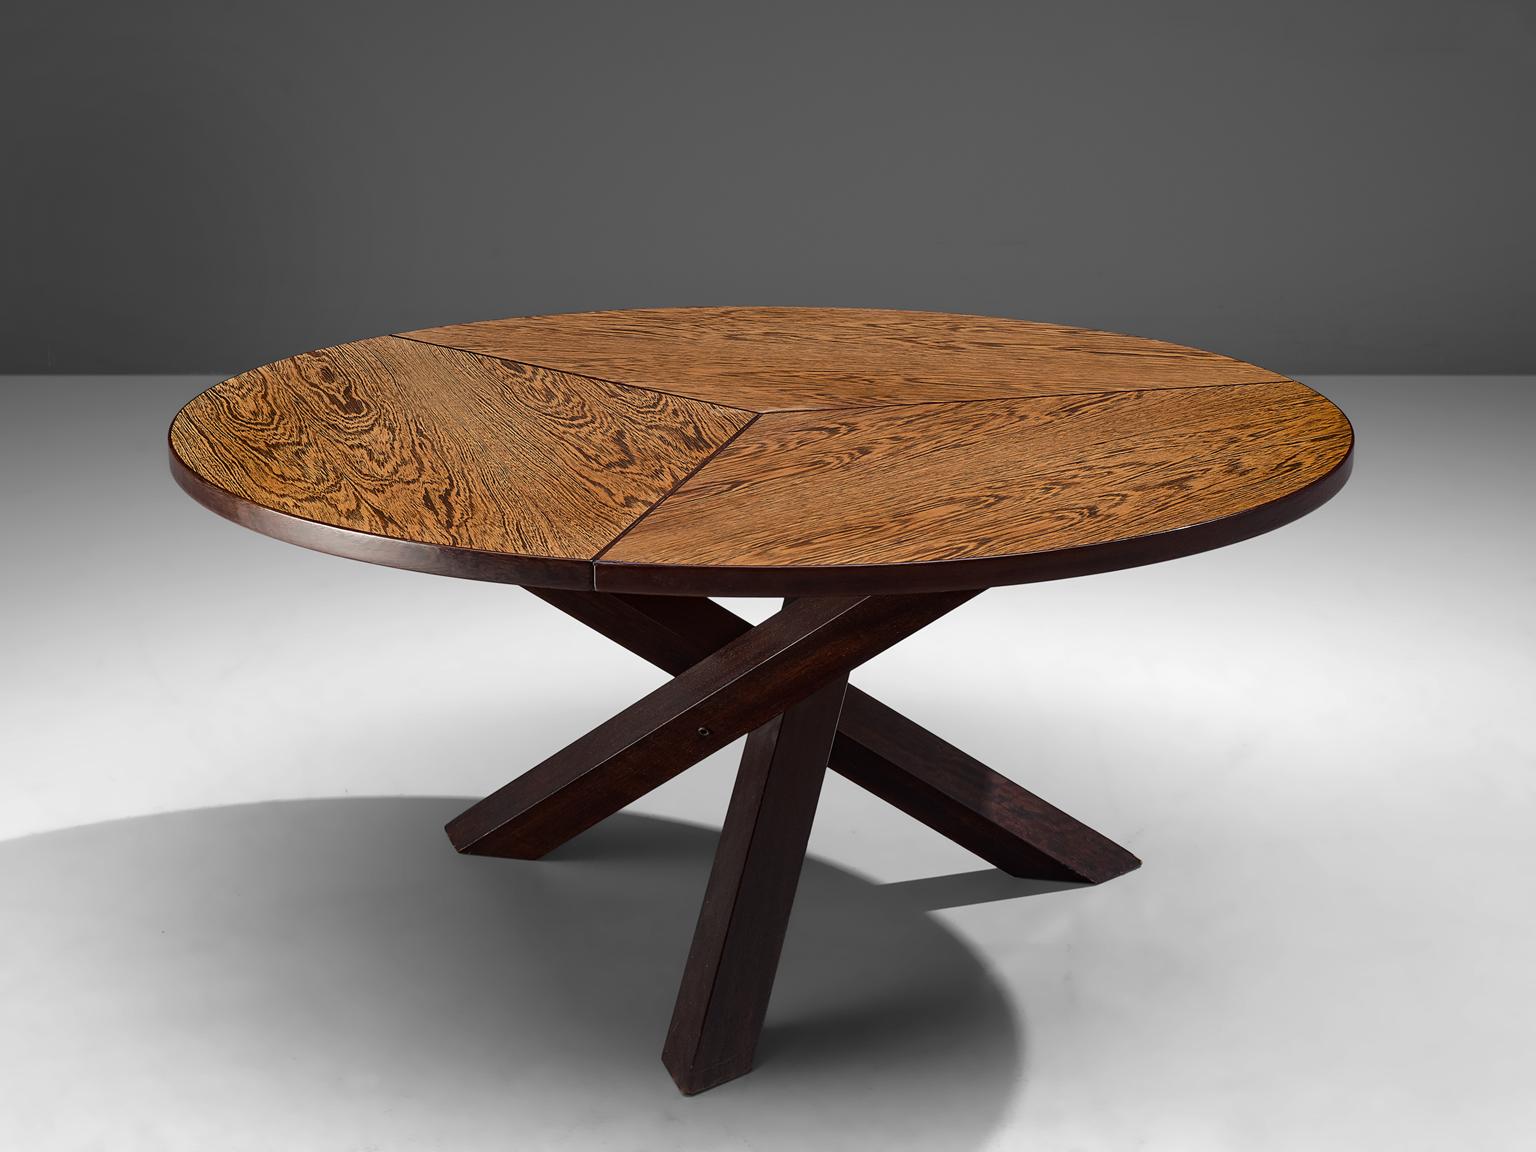 Martin Visser for 't Spectrum, dining table, in Wenge´ and wood, the Netherlands, 1960s.

Beautiful wengé dining table with round top, divided into three parts. The base consist of three crossed legs of solid, darkened wood. The veneer top shows